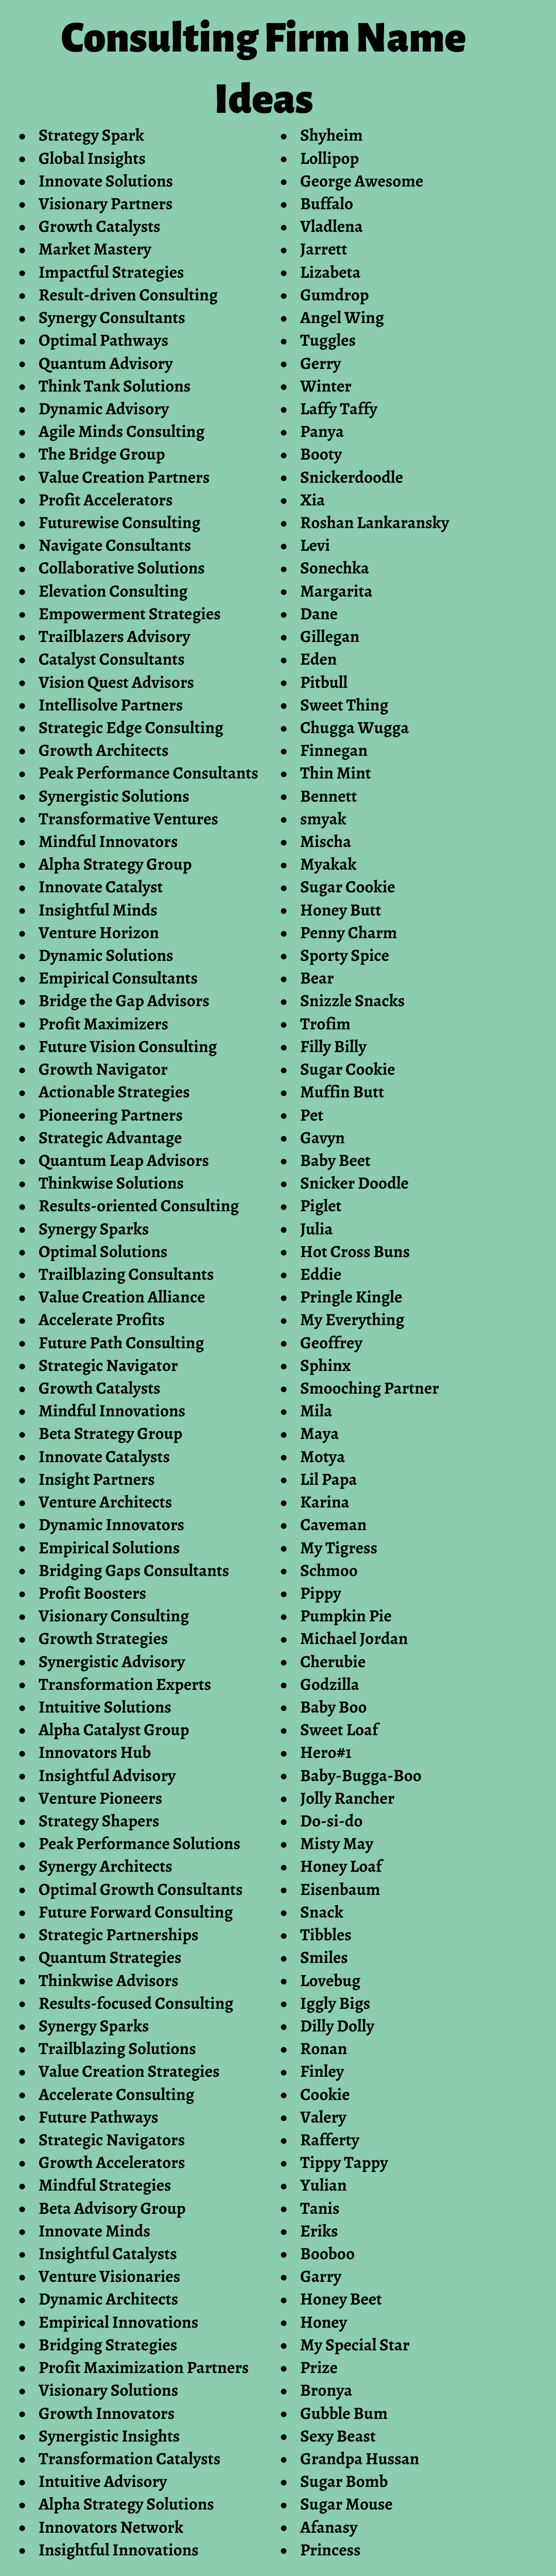 360 Unique Consulting Firm Name Ideas for You